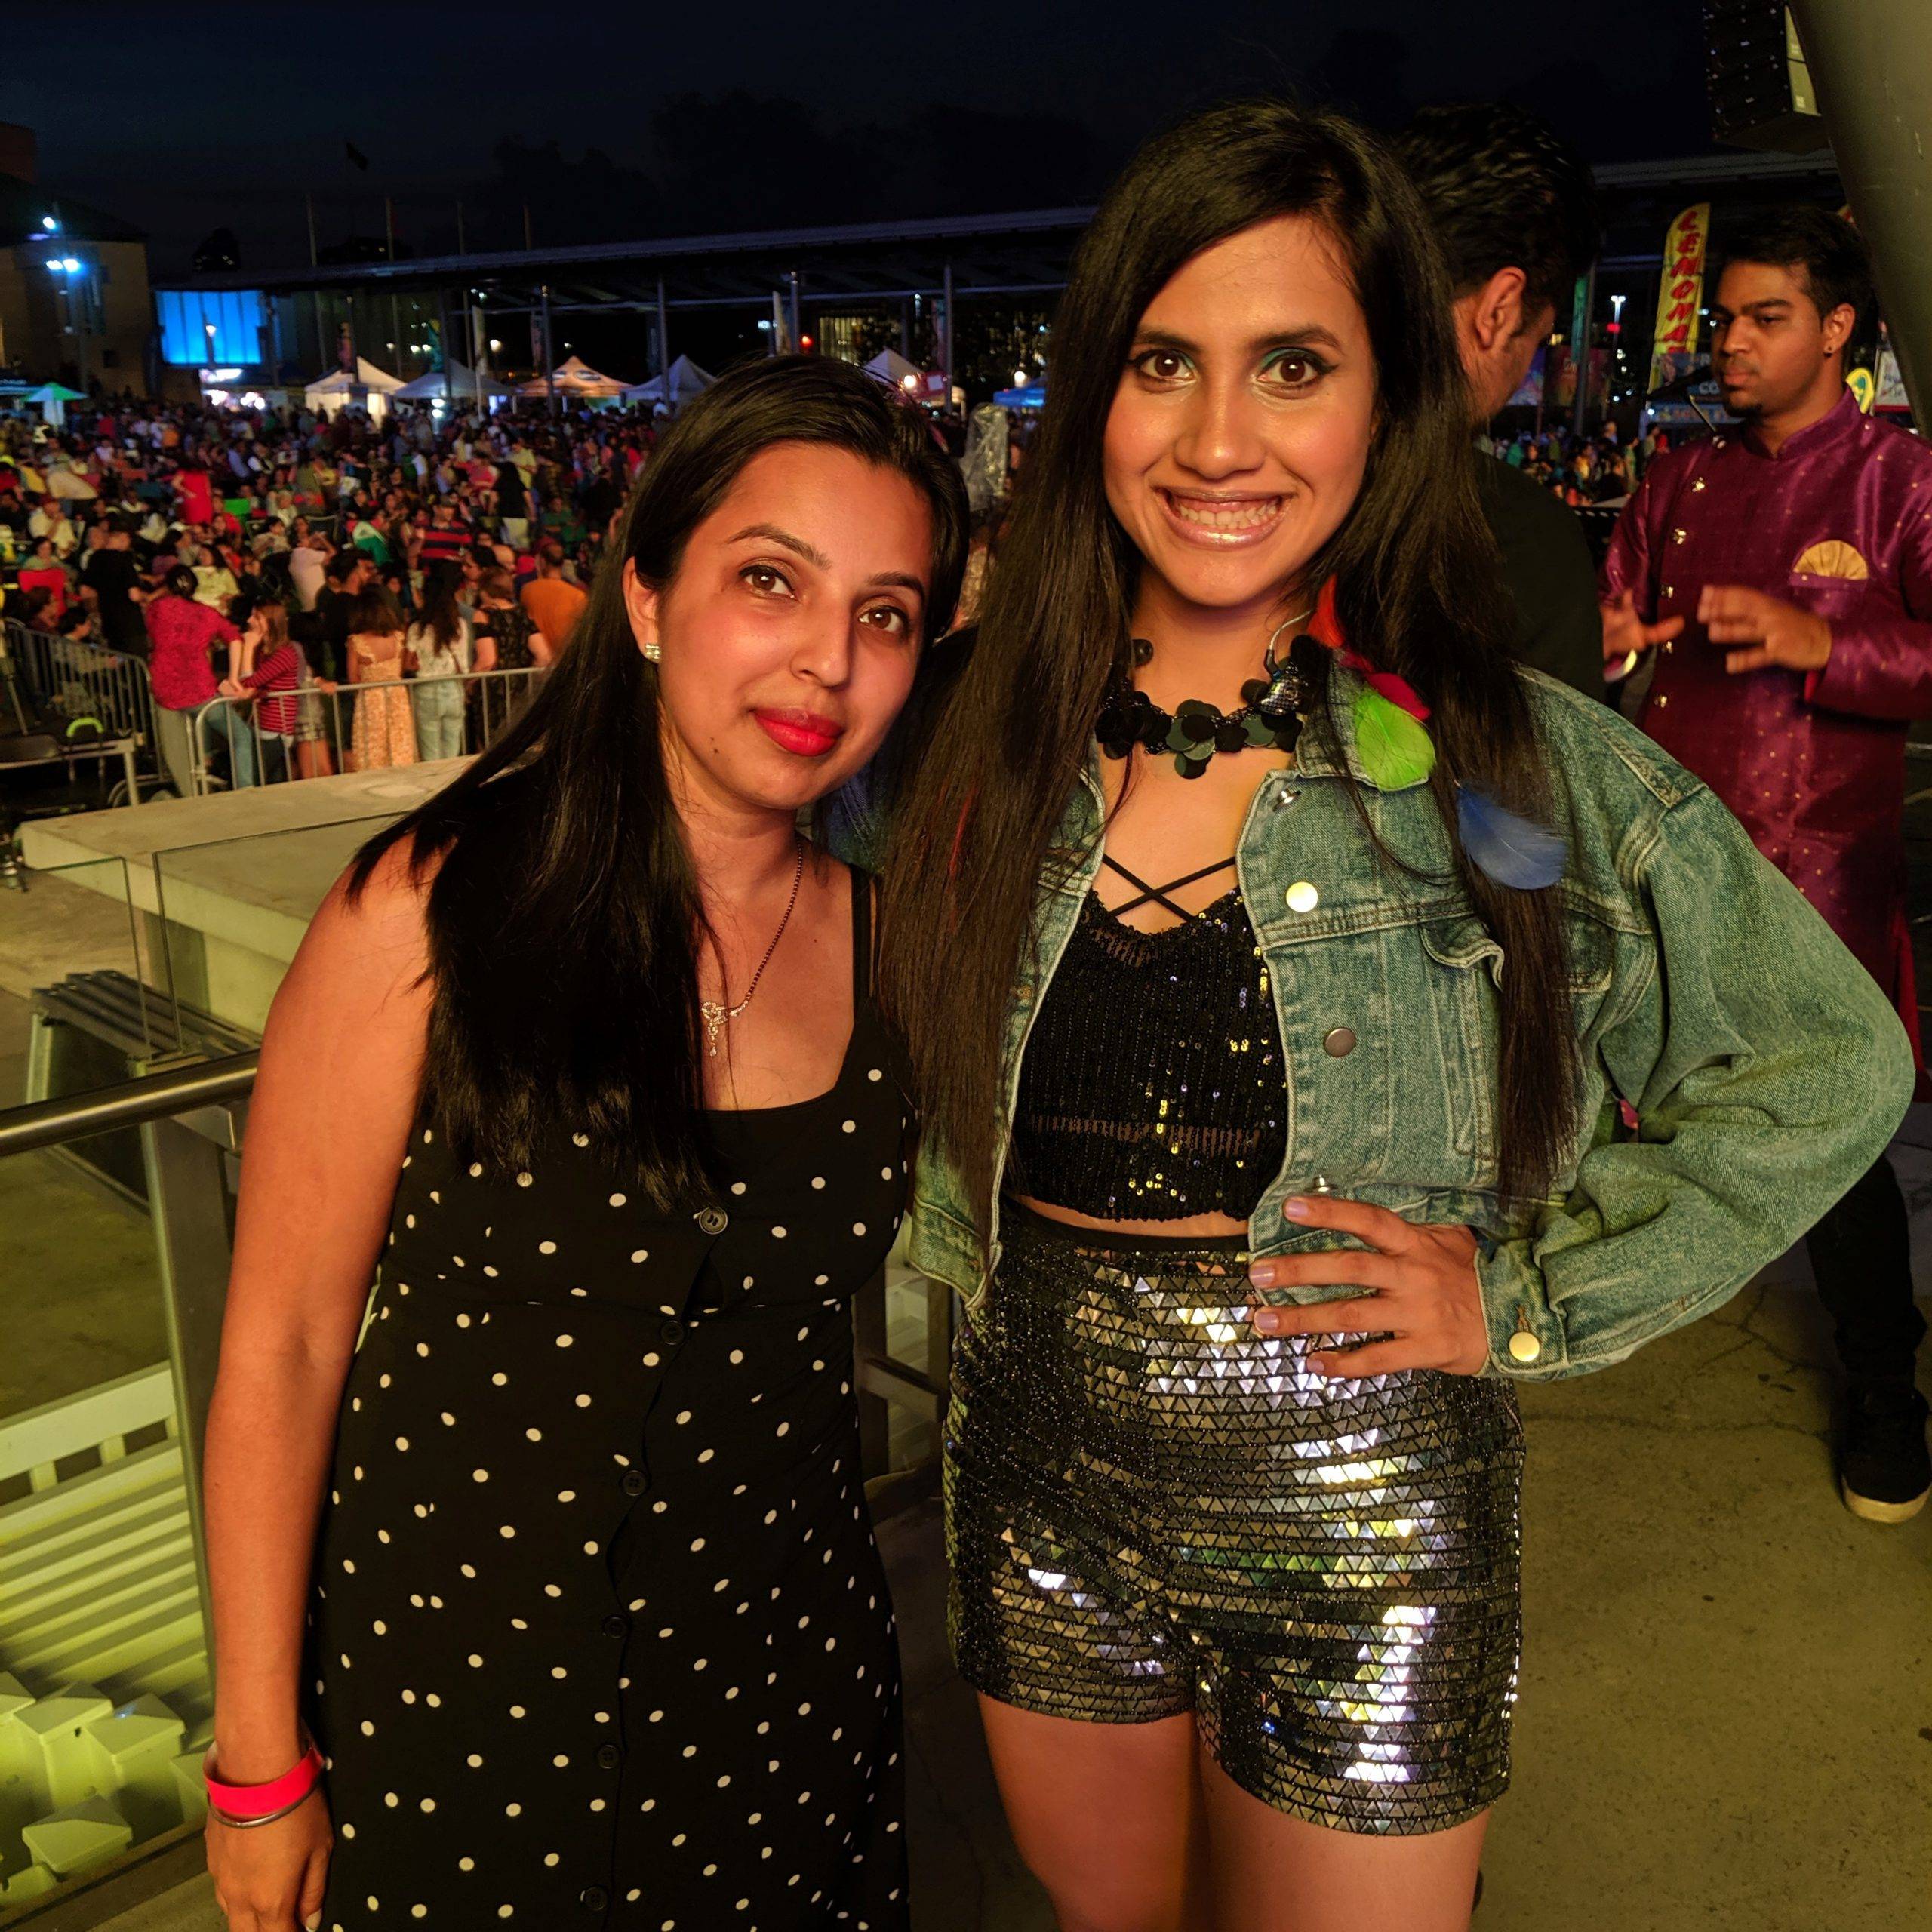 Pre-show photo of Creative Director and founder of Dance Expression Studio, Neha with Nikhita Gandhi, Bollywood celebrity singer, poised for a live Bollywood music event.